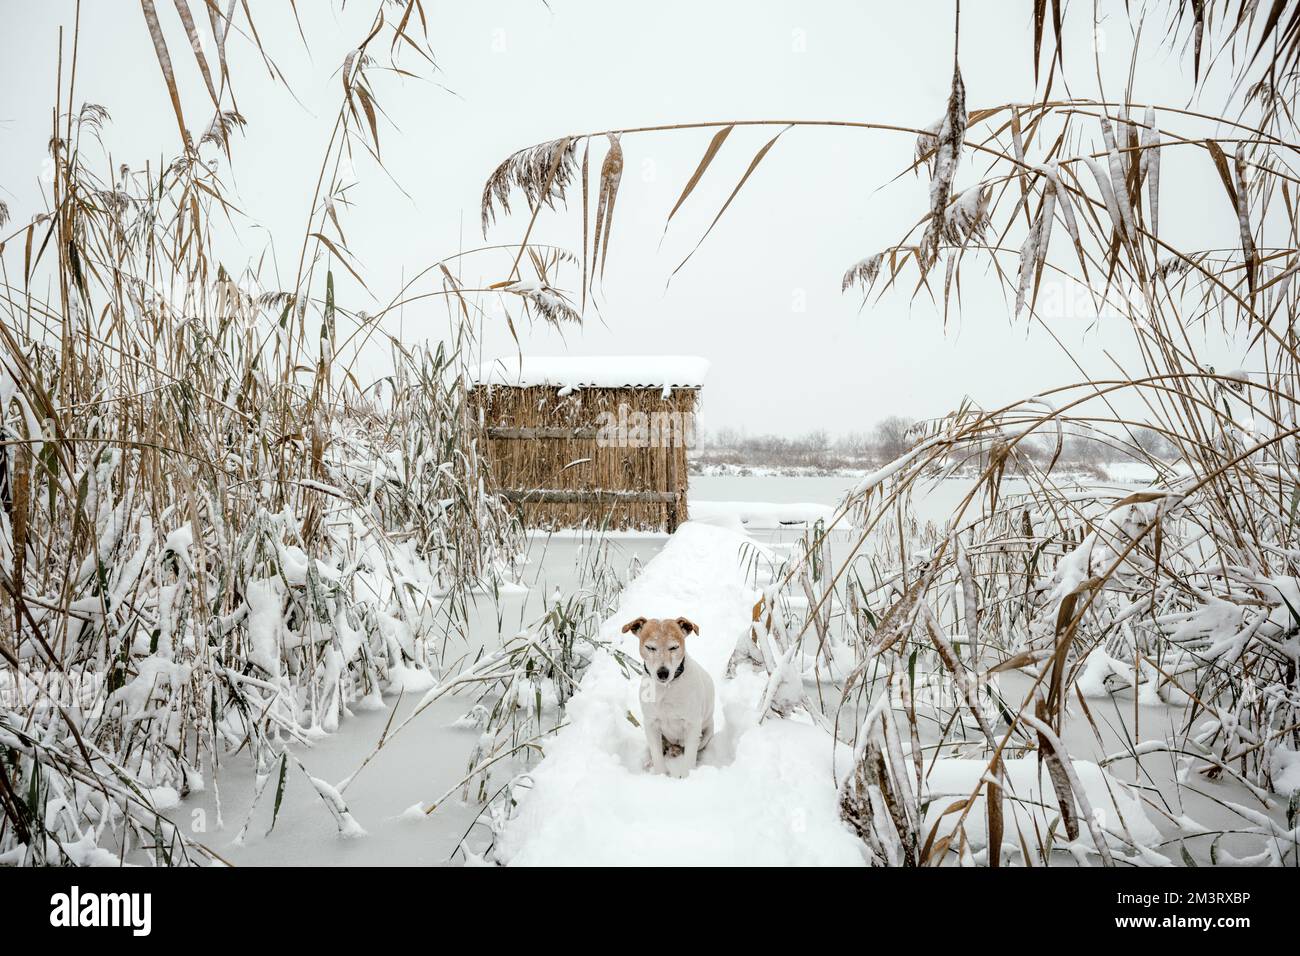 Peaceful minimalist winter landscape with a dog on a frozen lake. Reeds covered with snow and a hut in the background. Japan style wabi sabi concept Stock Photo